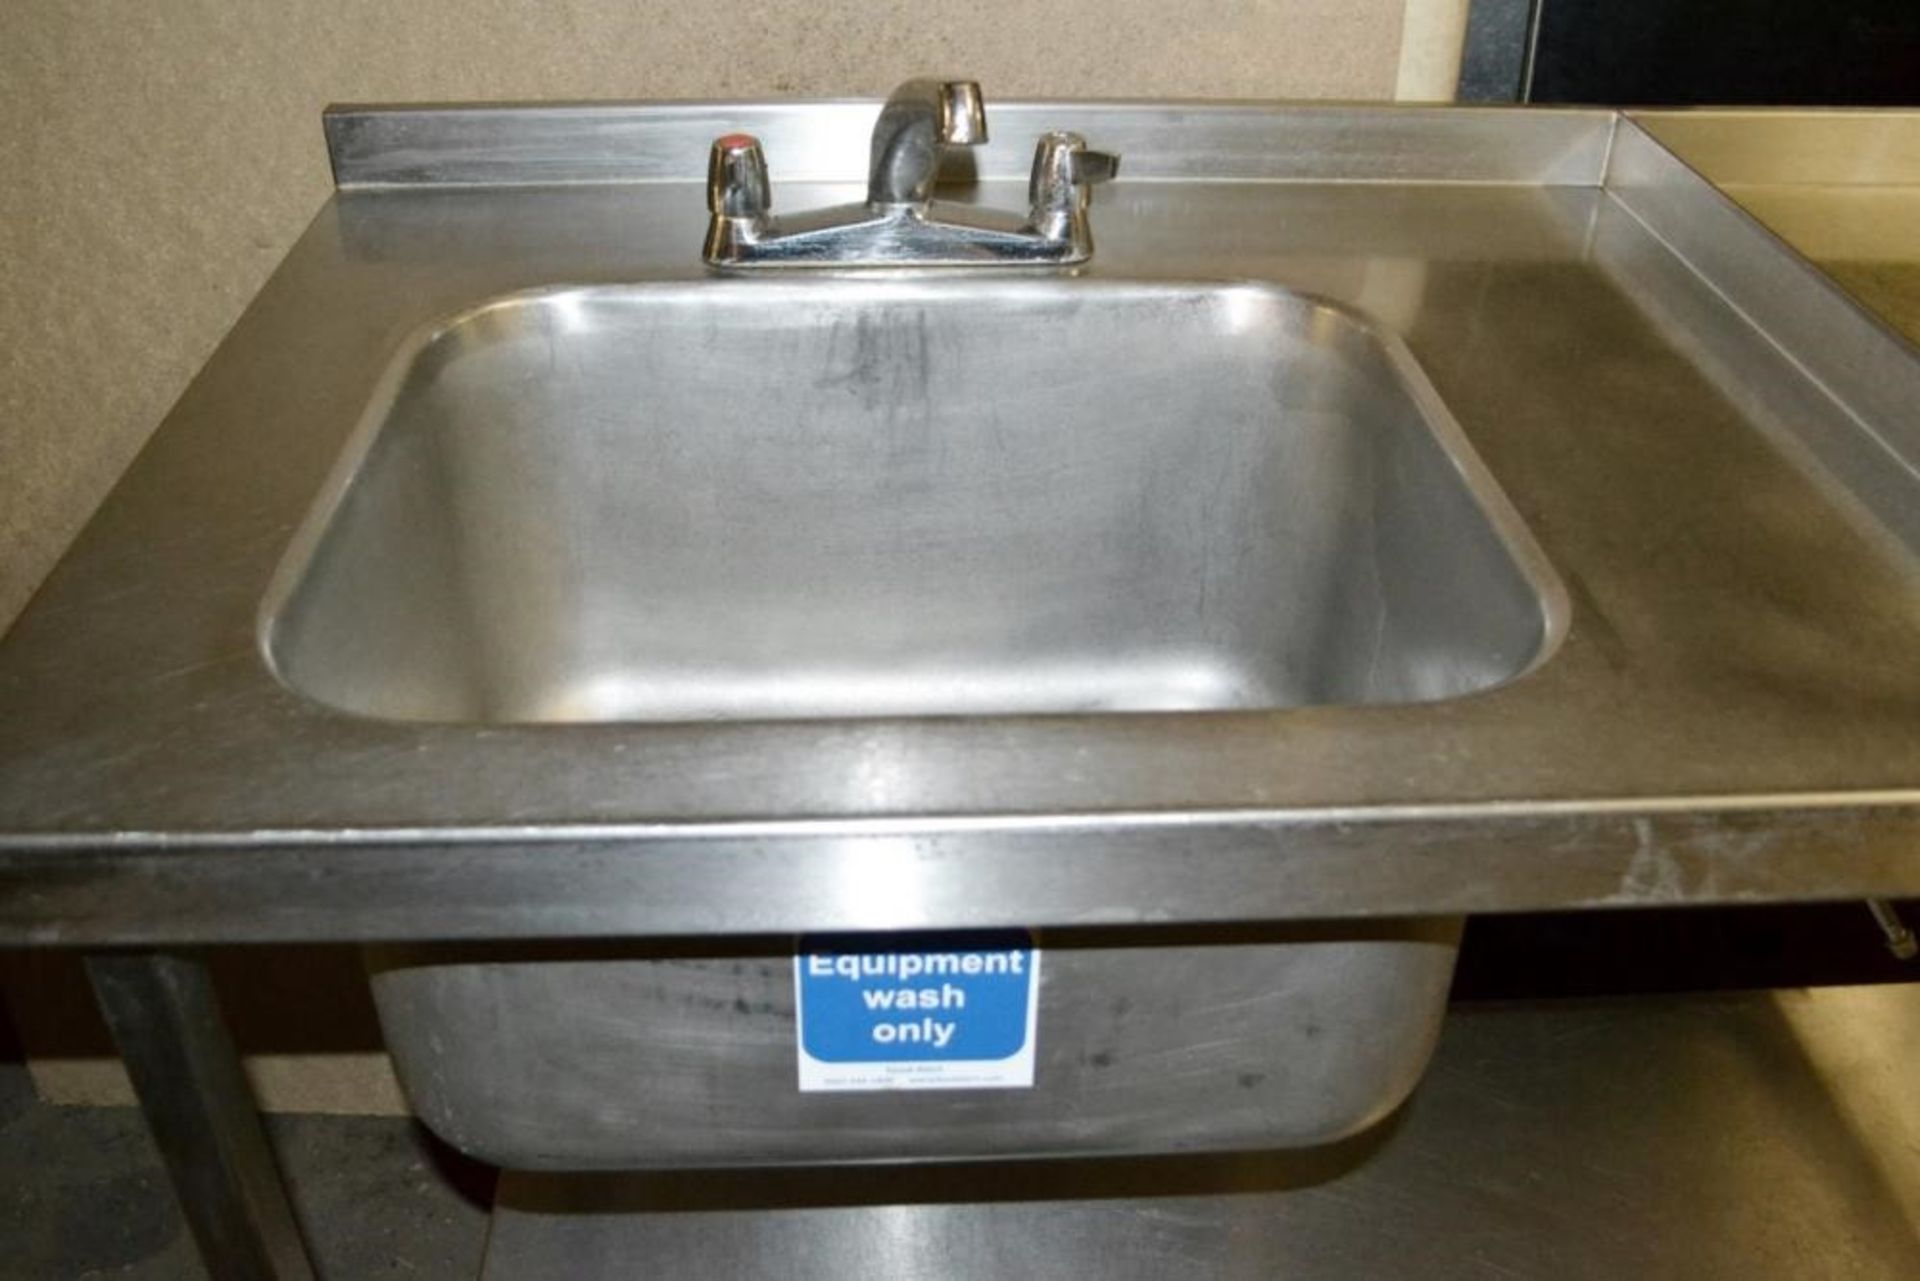 1 x Commercial Stainless Steel Double Sink Unit With Mixer Tap, Spillage Lip, Splashback and Undersh - Image 3 of 6